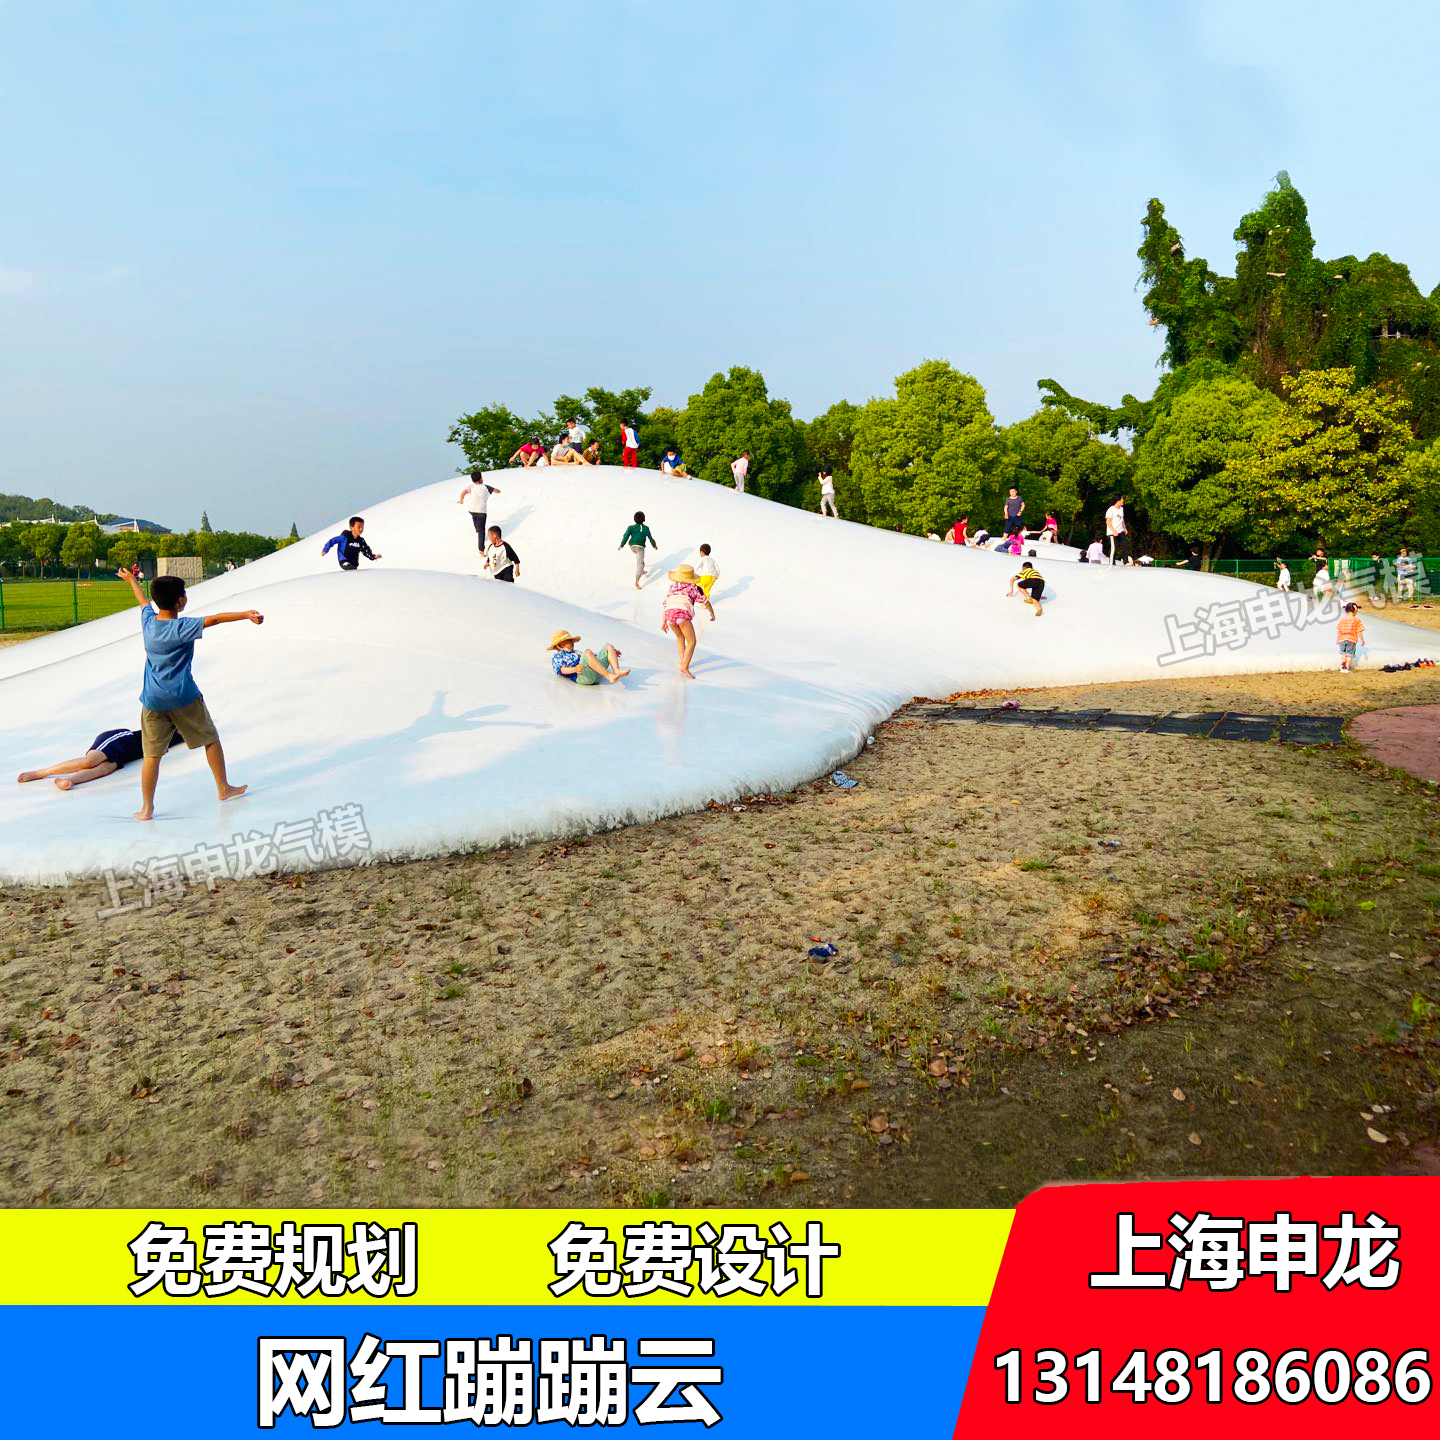 Net red inflatable bouncing cloud manufacturers paradise farm rainbow big trampoline beach scenic spot large outdoor jumping cloud jumping cloud